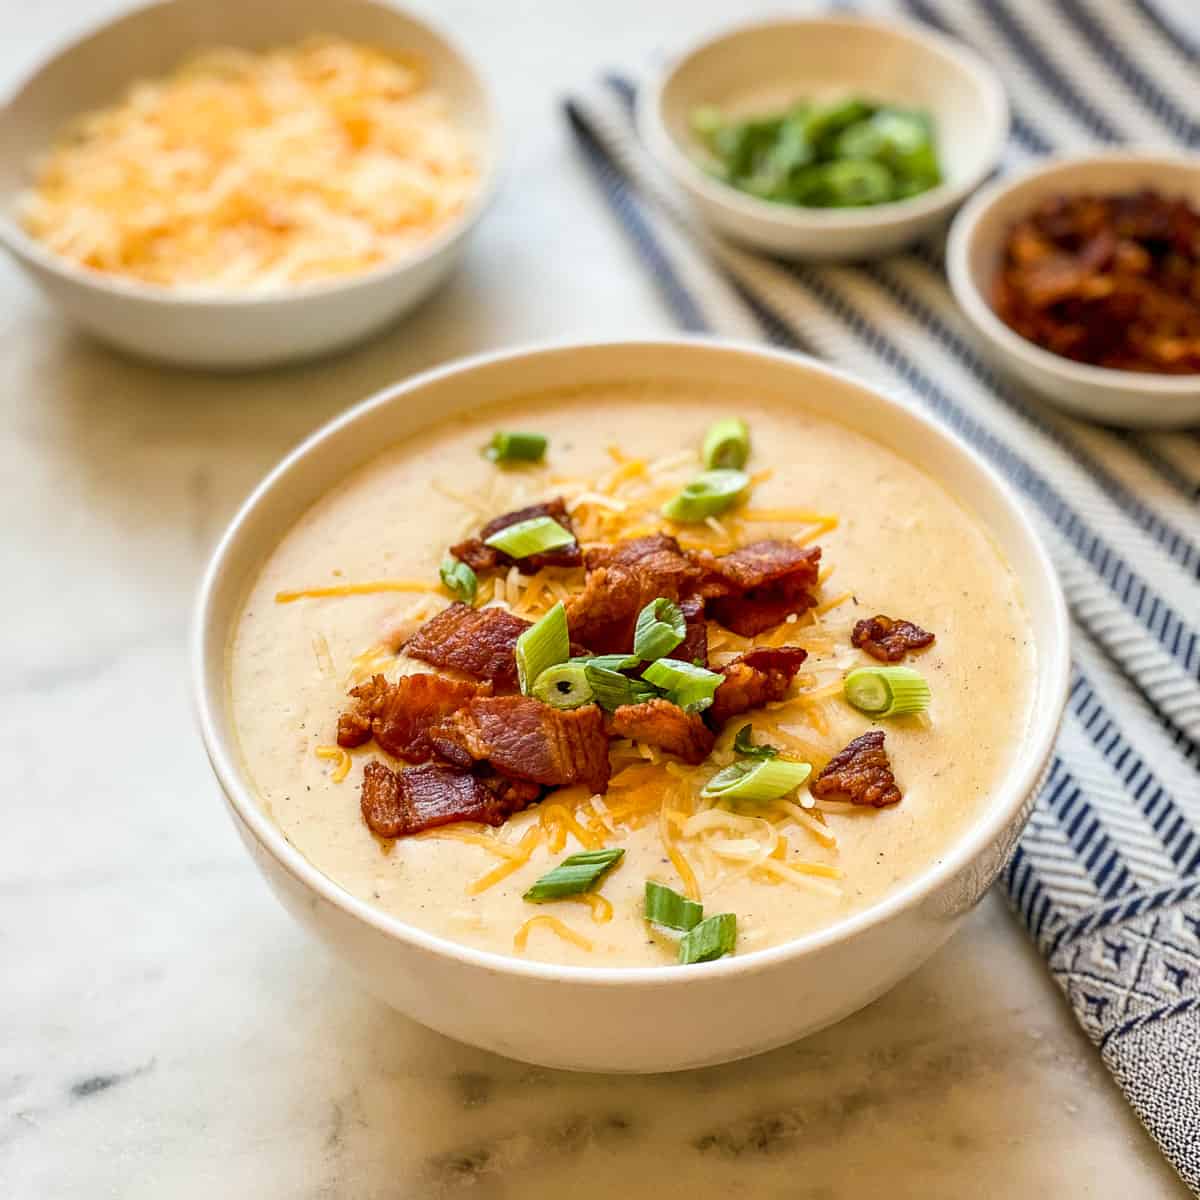 A bowl of Cheesy Potato Soup with Bacon show with various toppings.